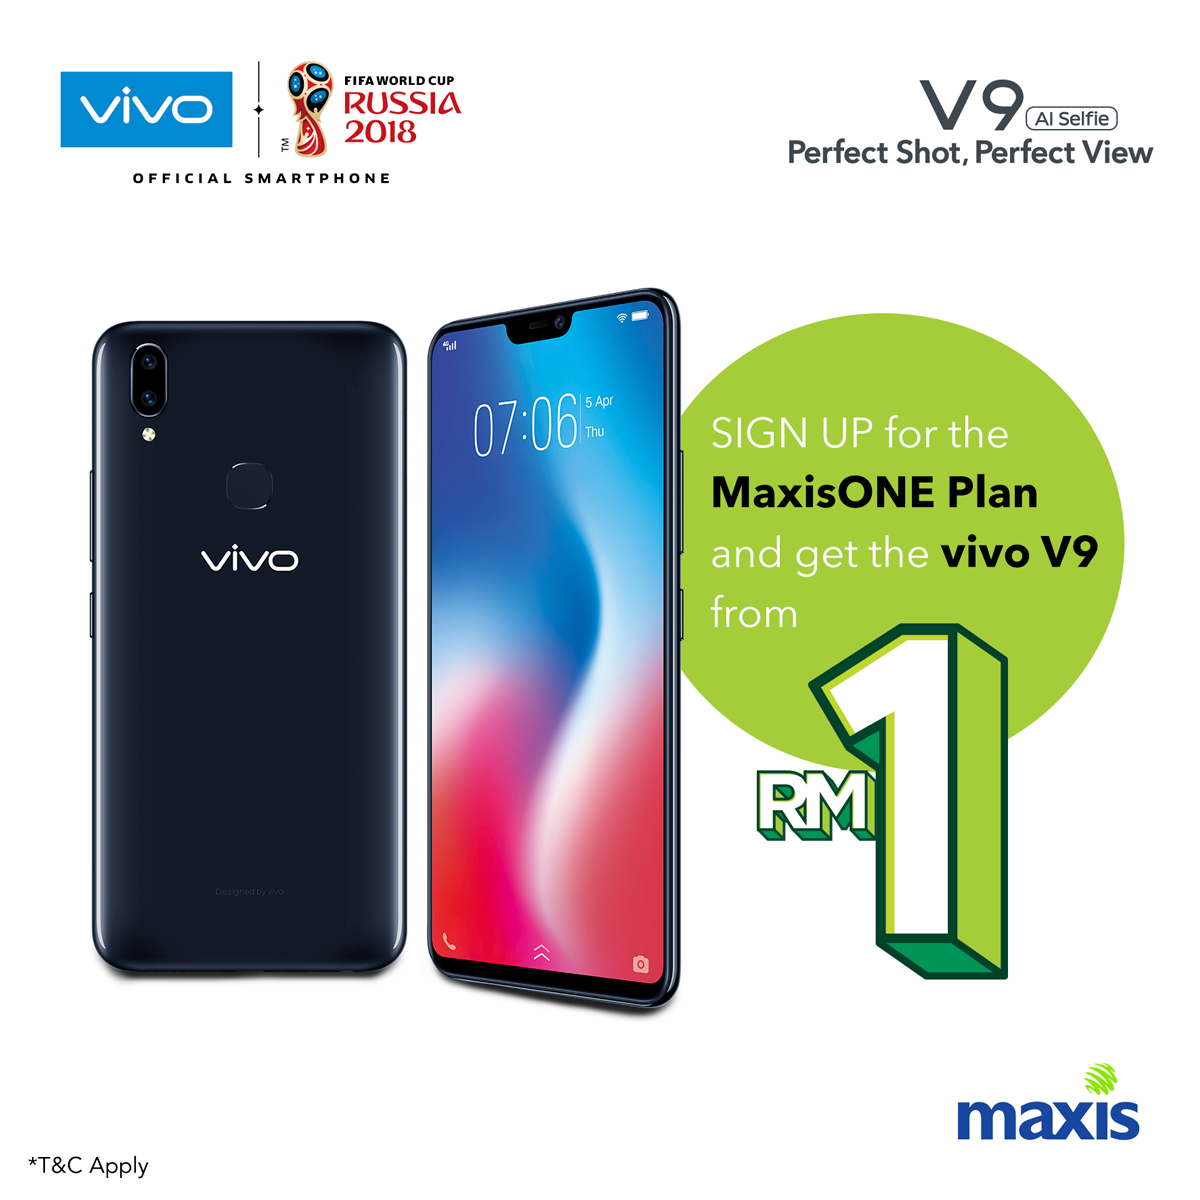 vivo V9 is available on MaxisONE Plan and you can get it for just RM1